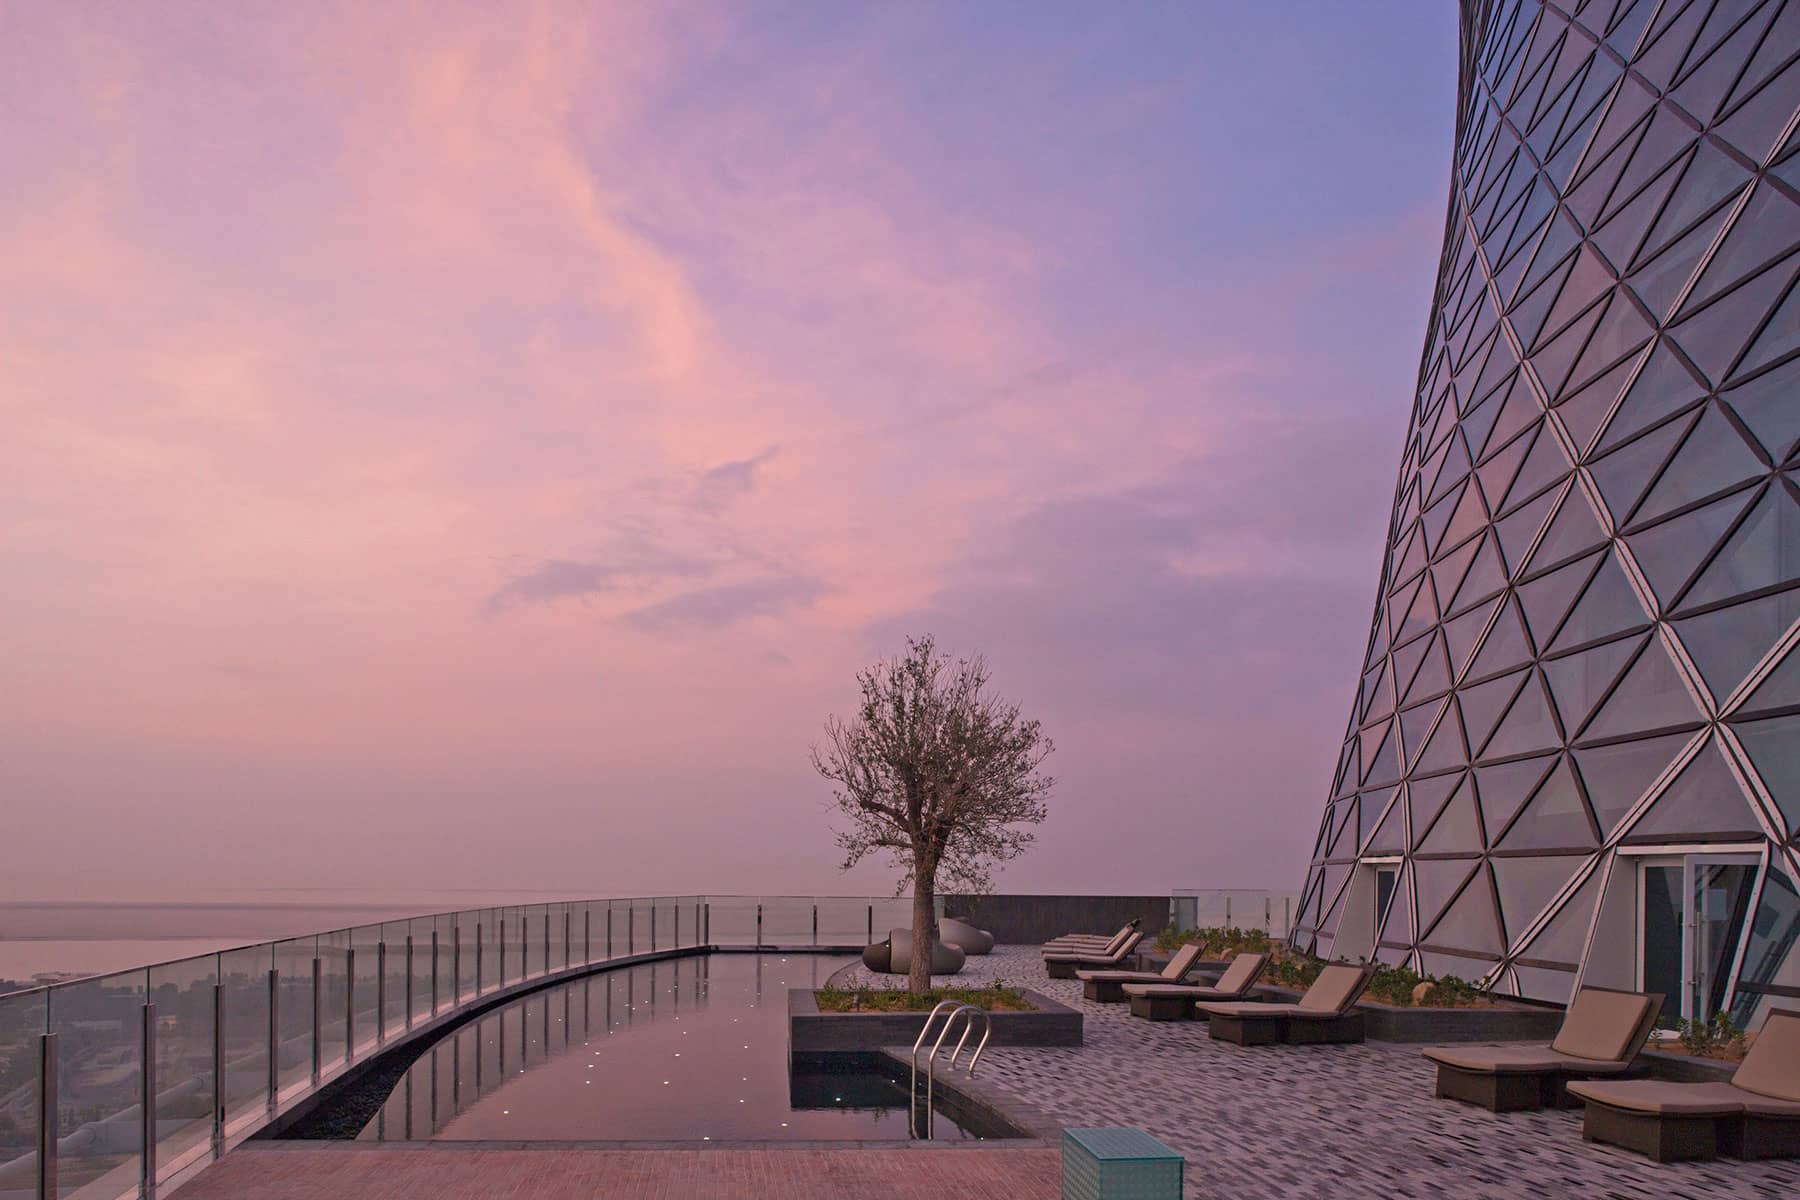 Architecture Photography: A serene pool deck at dawn: Andaz Hotel, Capital Gate Building, Abu Dhabi.